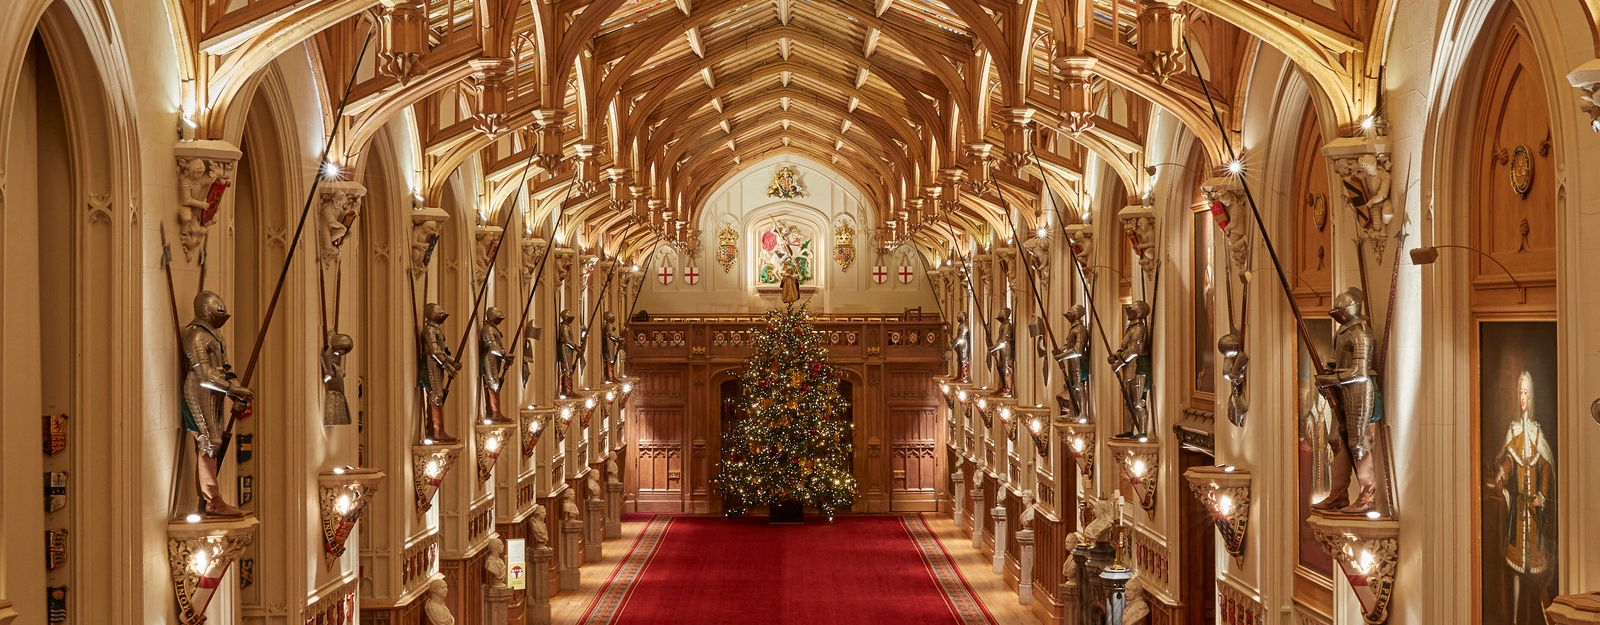 Photograph of a Christmas tree in St George's Hall, Windsor Castle